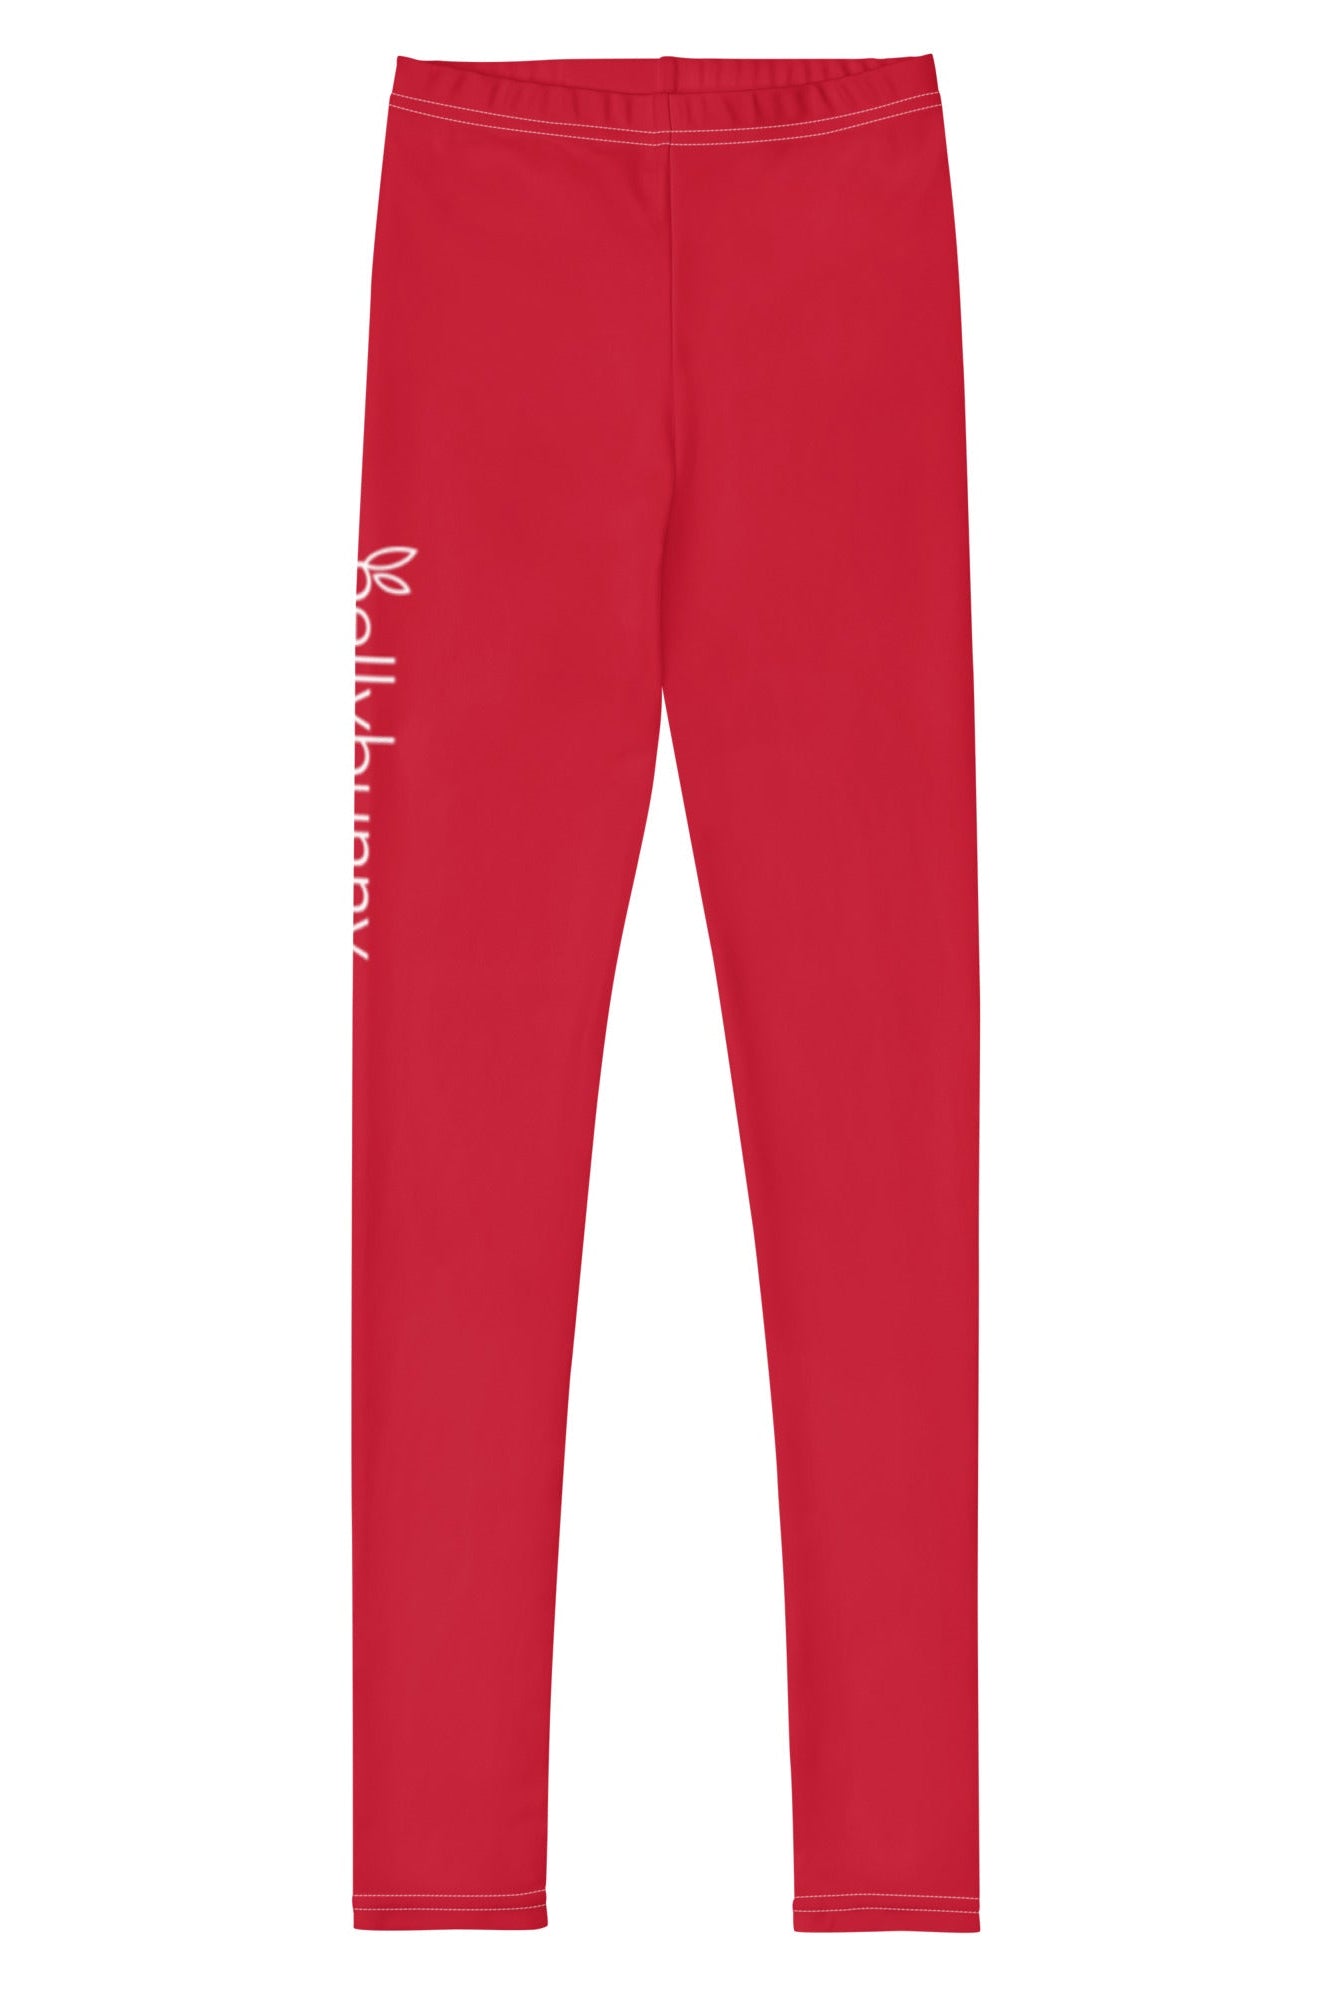 Bellybunny-Youth Leggings-red with white logo